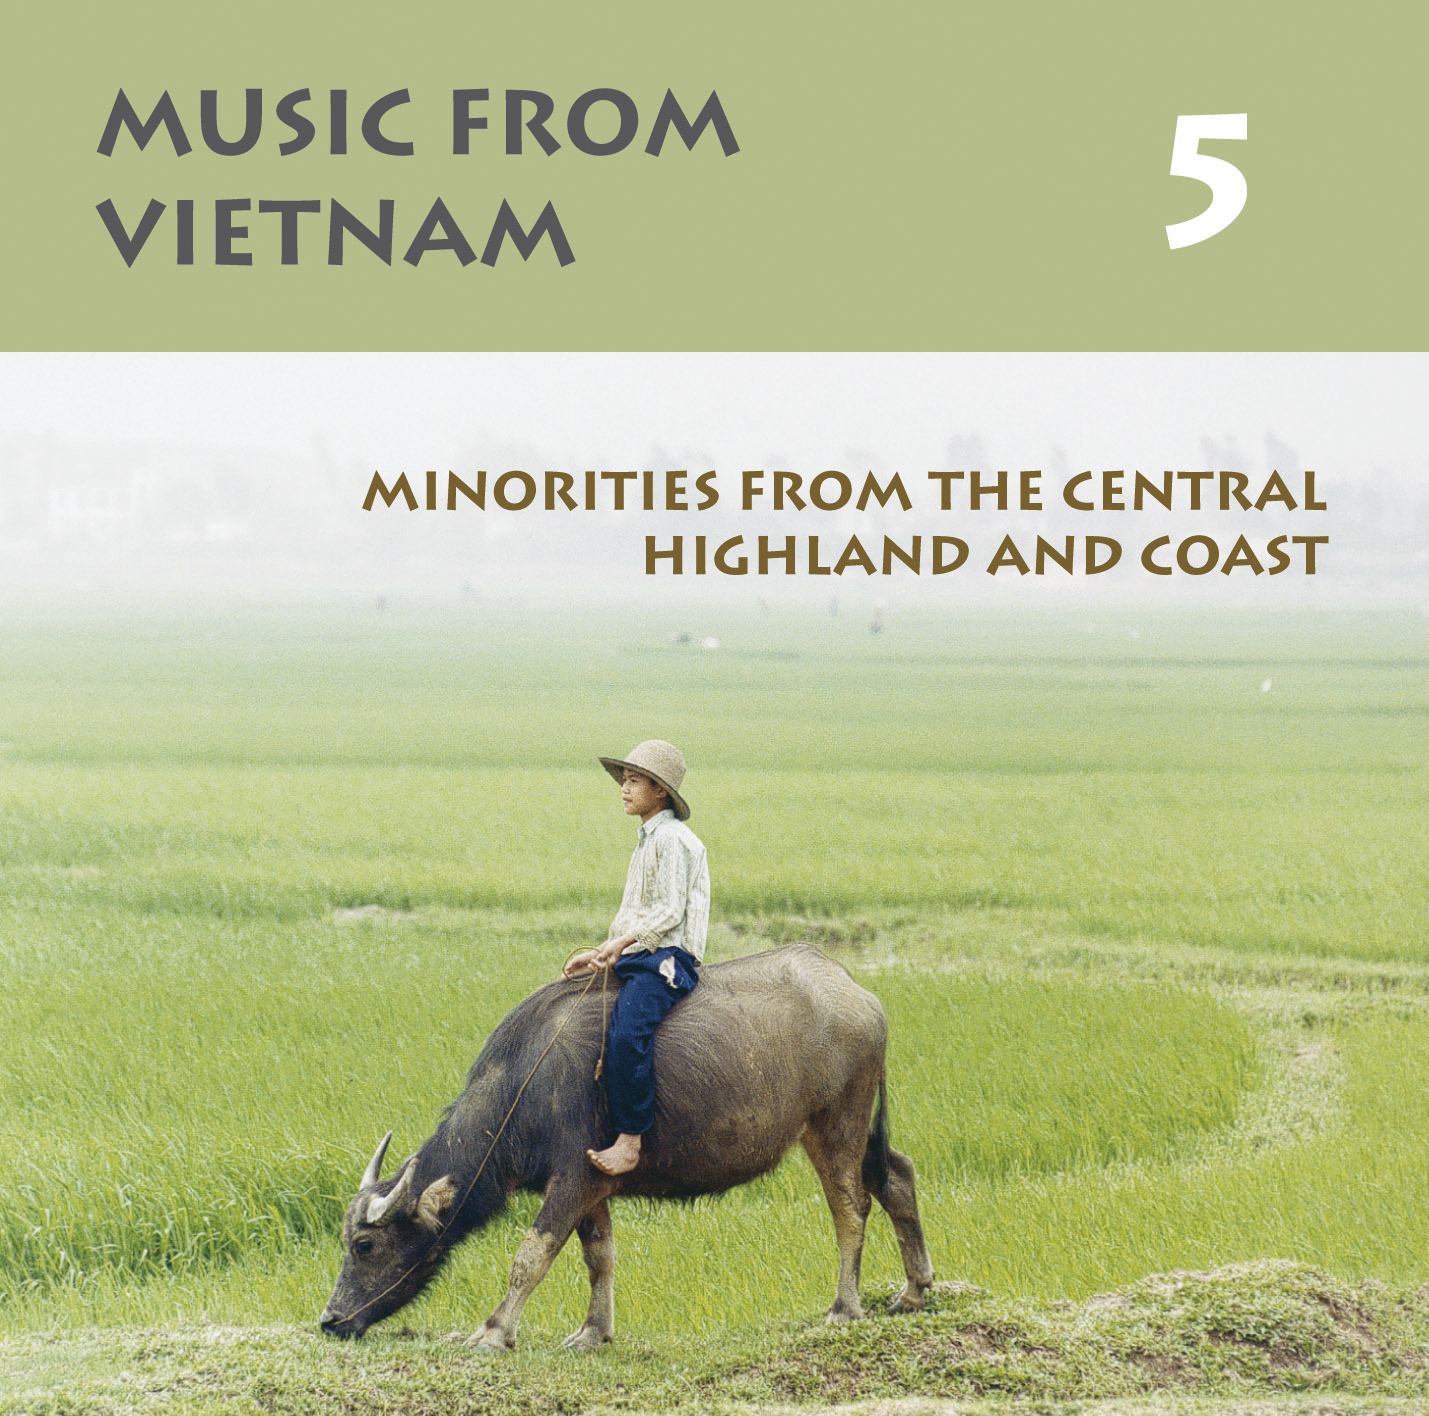 Music from Vietnam 5: Minorities from the central